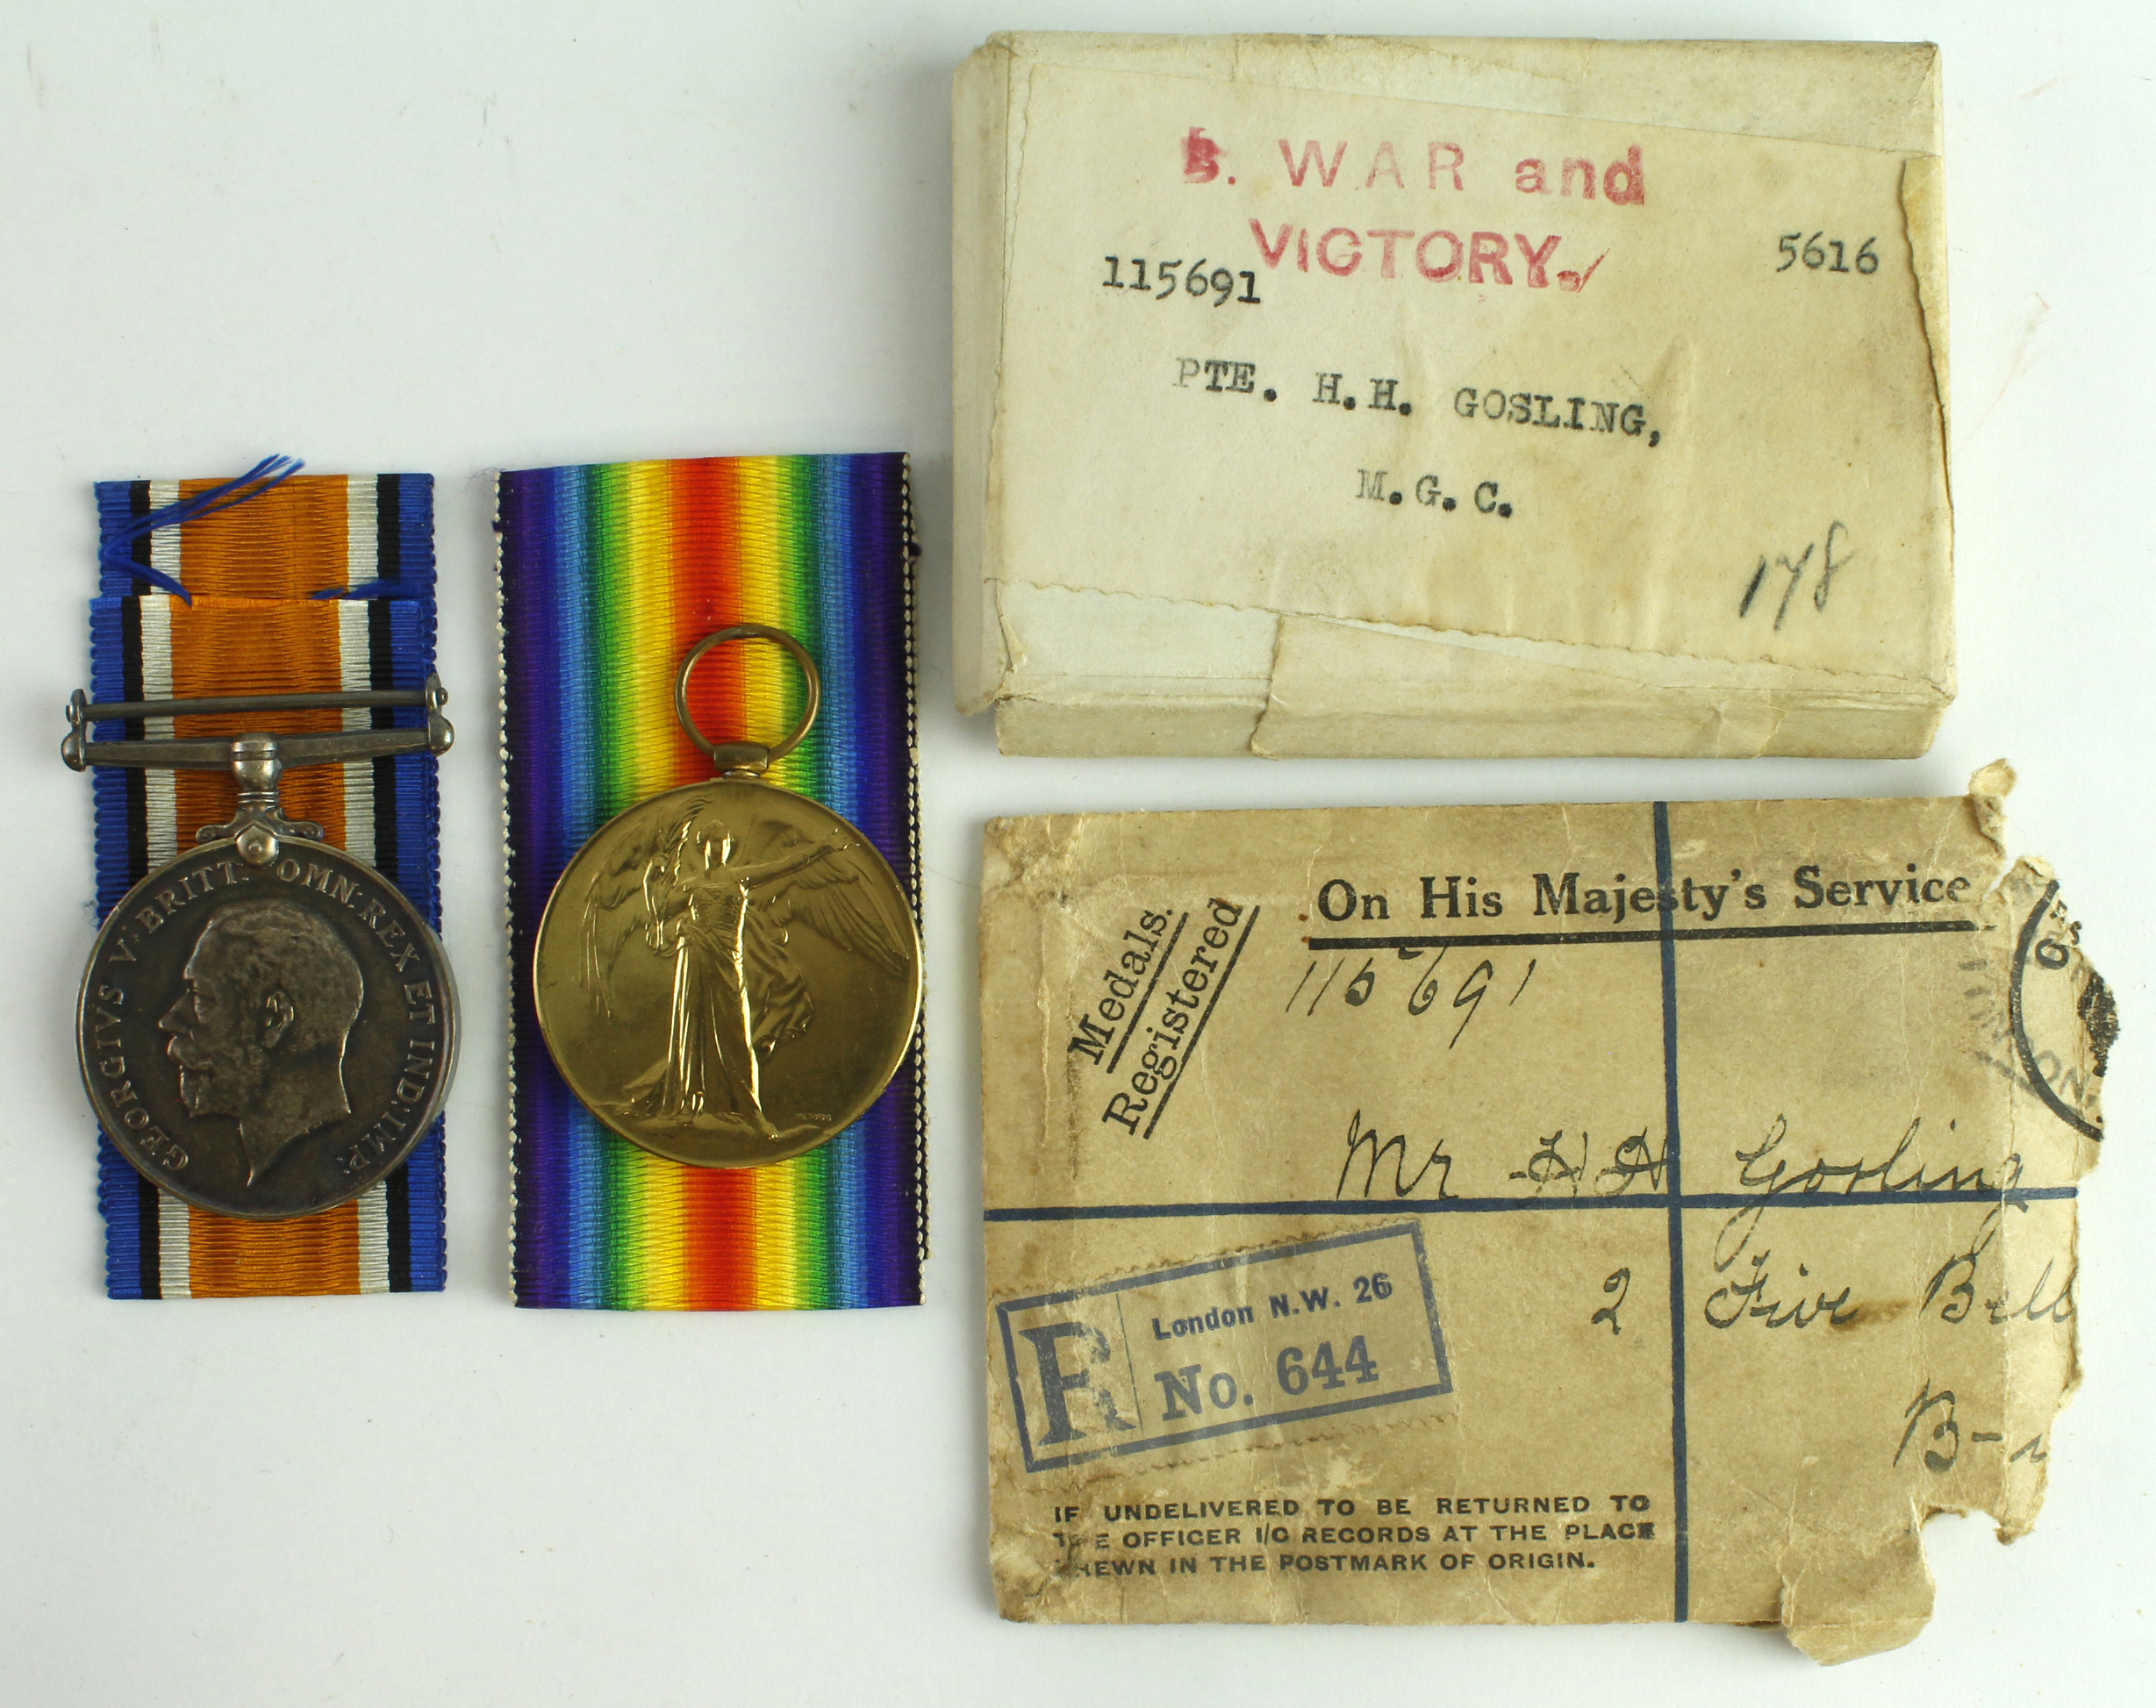 BWM & Victory Medal (115691 Pte H H Gosling MGC) with box and envelope. Died 1943 with an estate